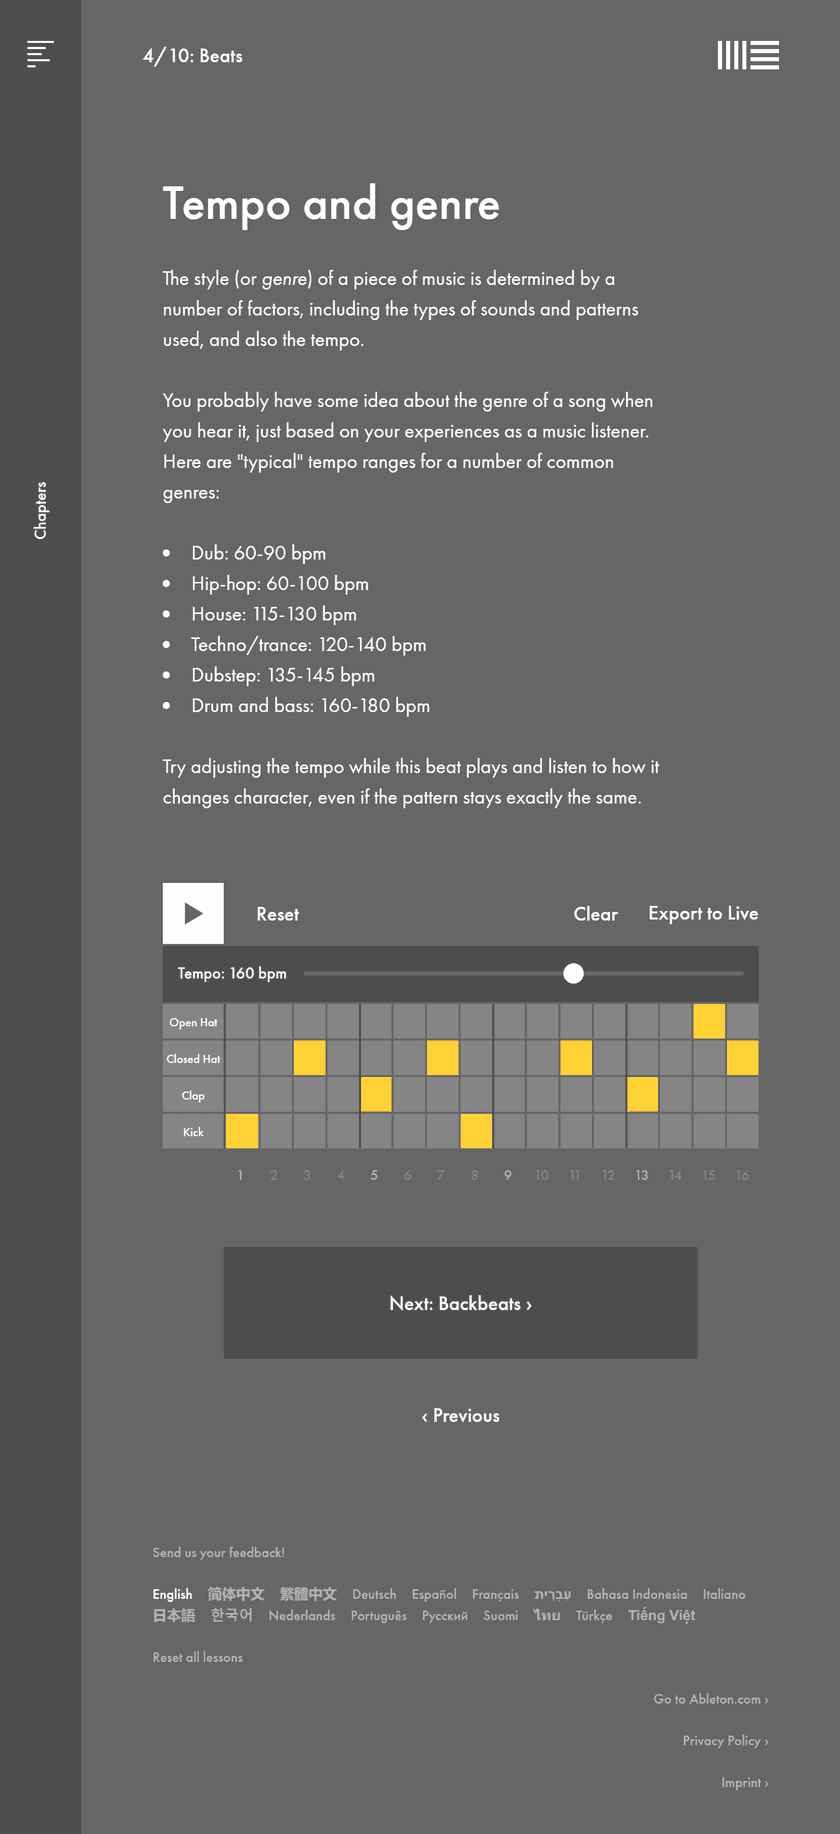 Ableton's awesome 'Learning Music' guide